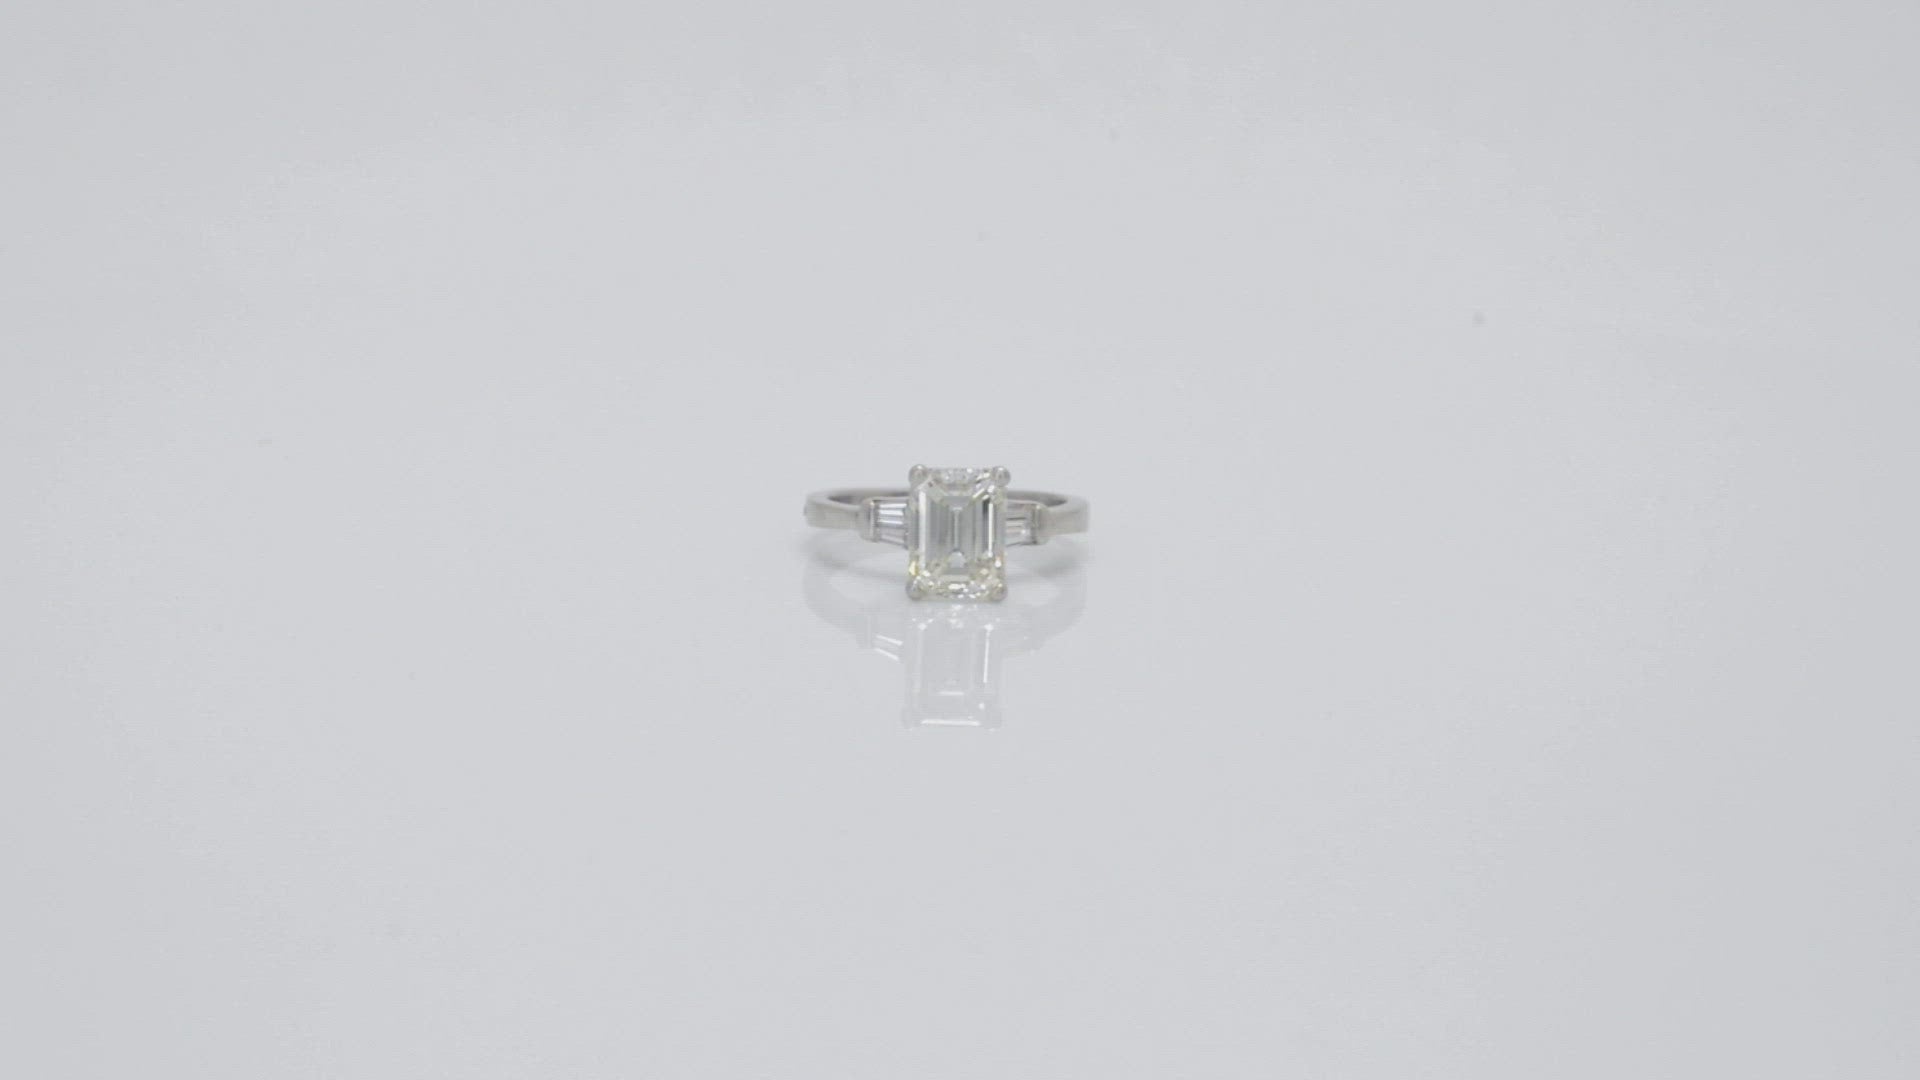 This platinum diamonds solitaire bridal ring is from the 1920's Art Deco era.